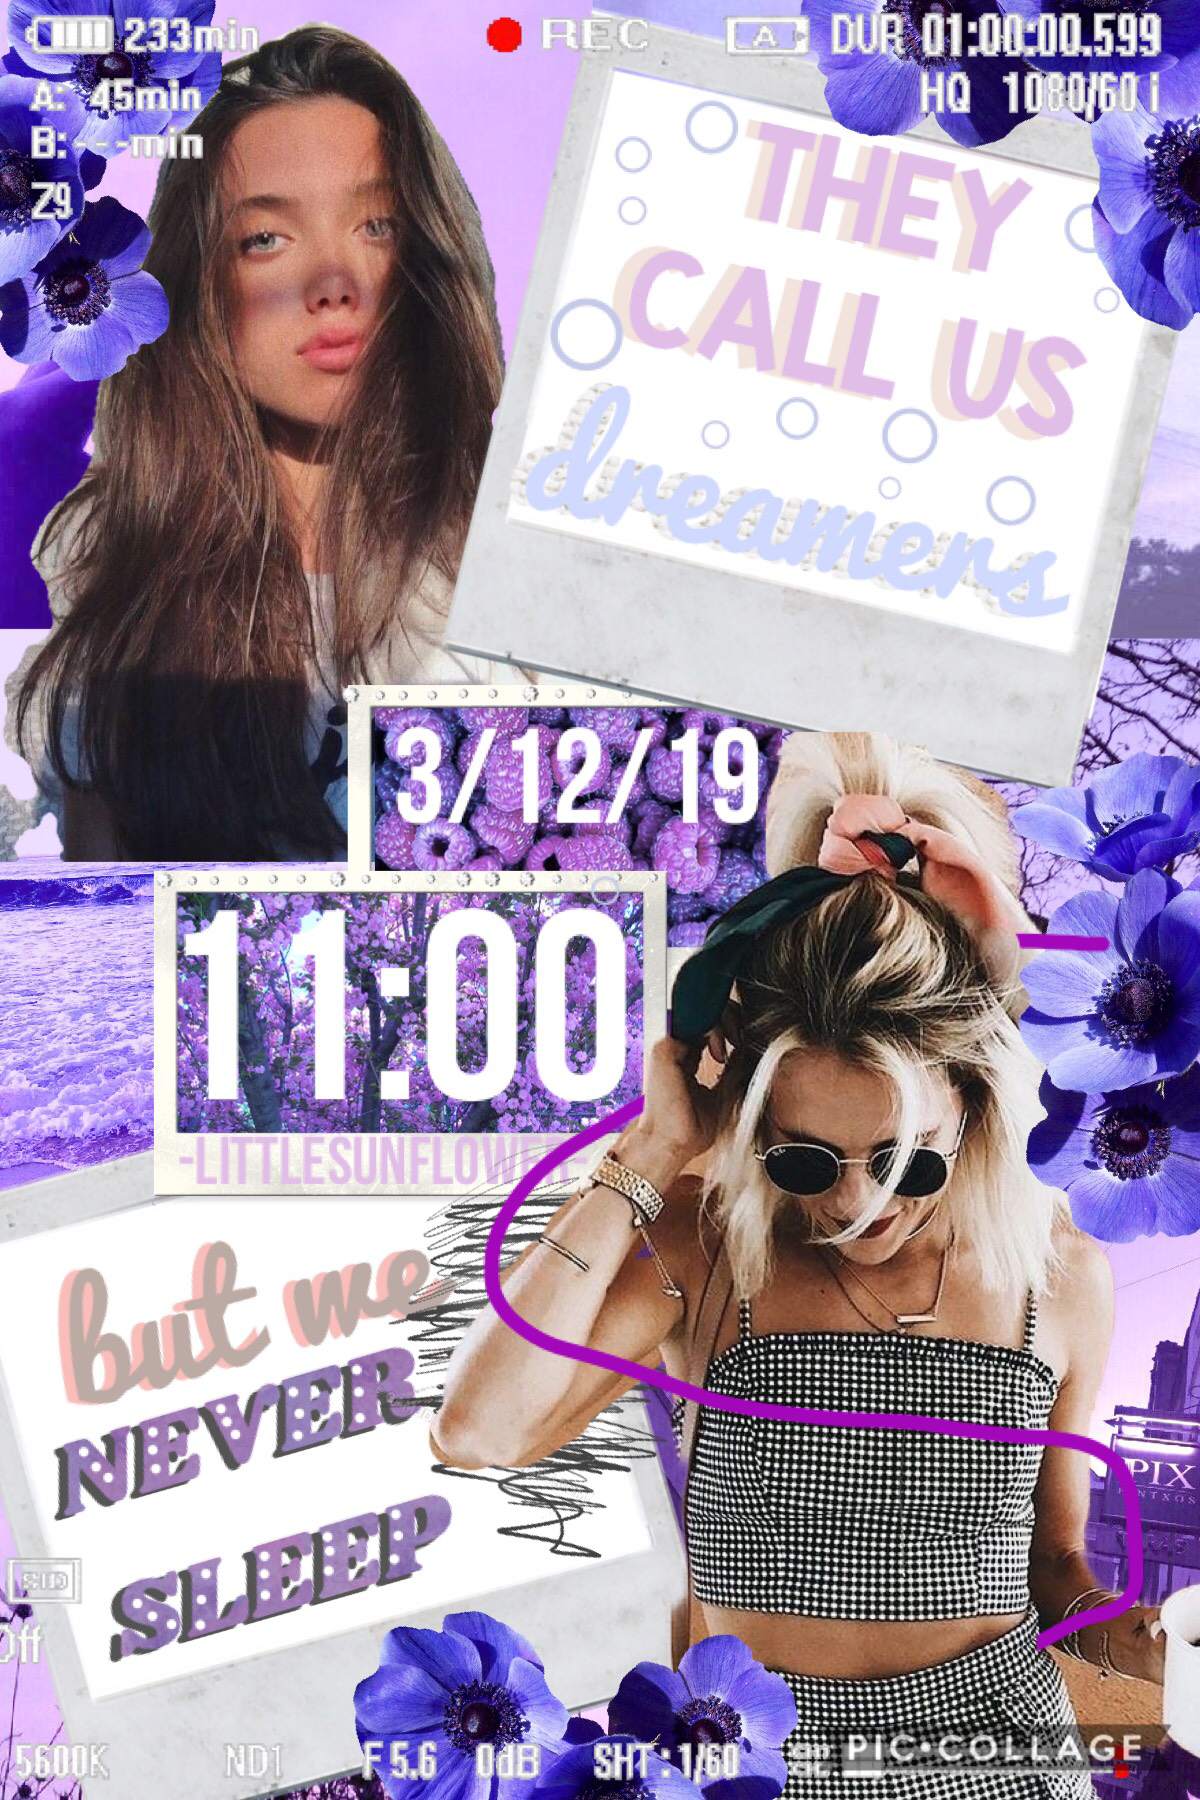 💜t a p💜
i think this one kinda cool... sorry i haven’t posted in a while! pls go vote on my extras account! (-LittleSunflowerExtras-) anyone wanna collab? 💕 cat